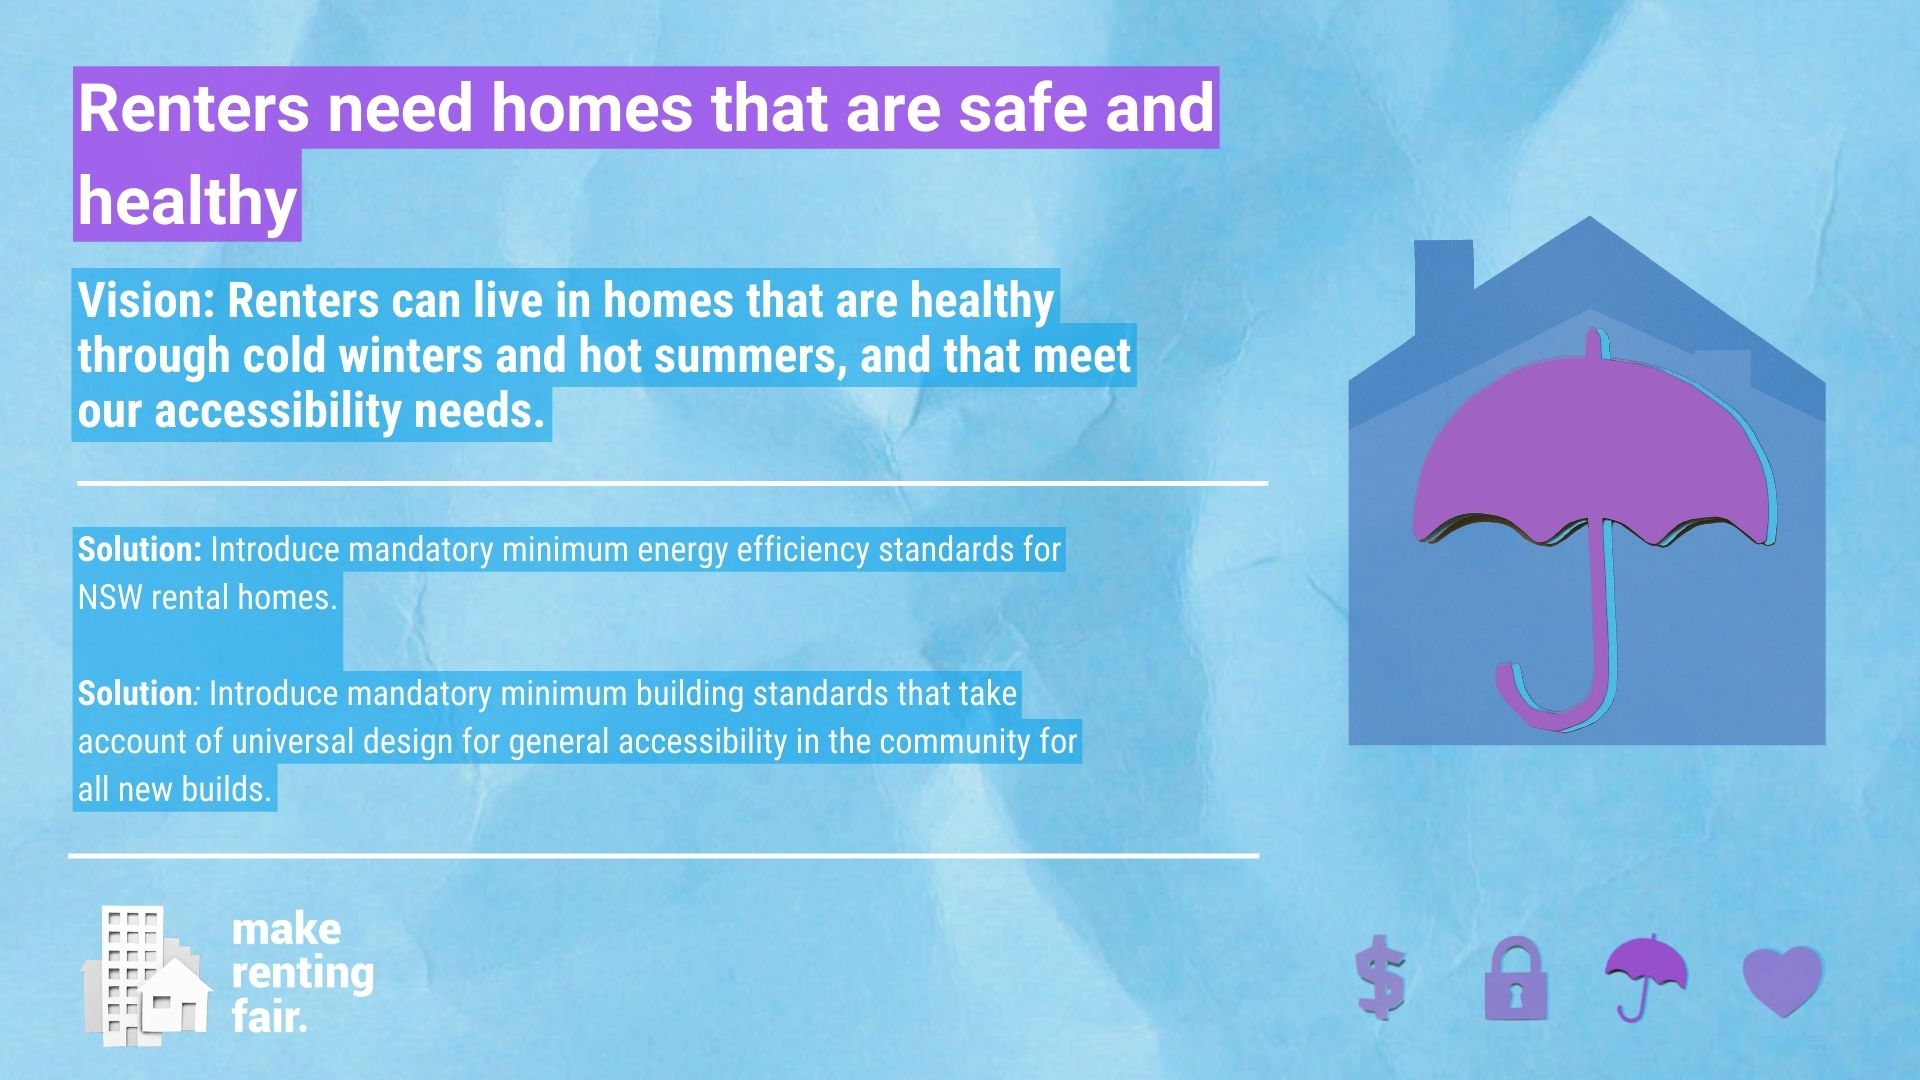 Renters need homes that are safe and healthy